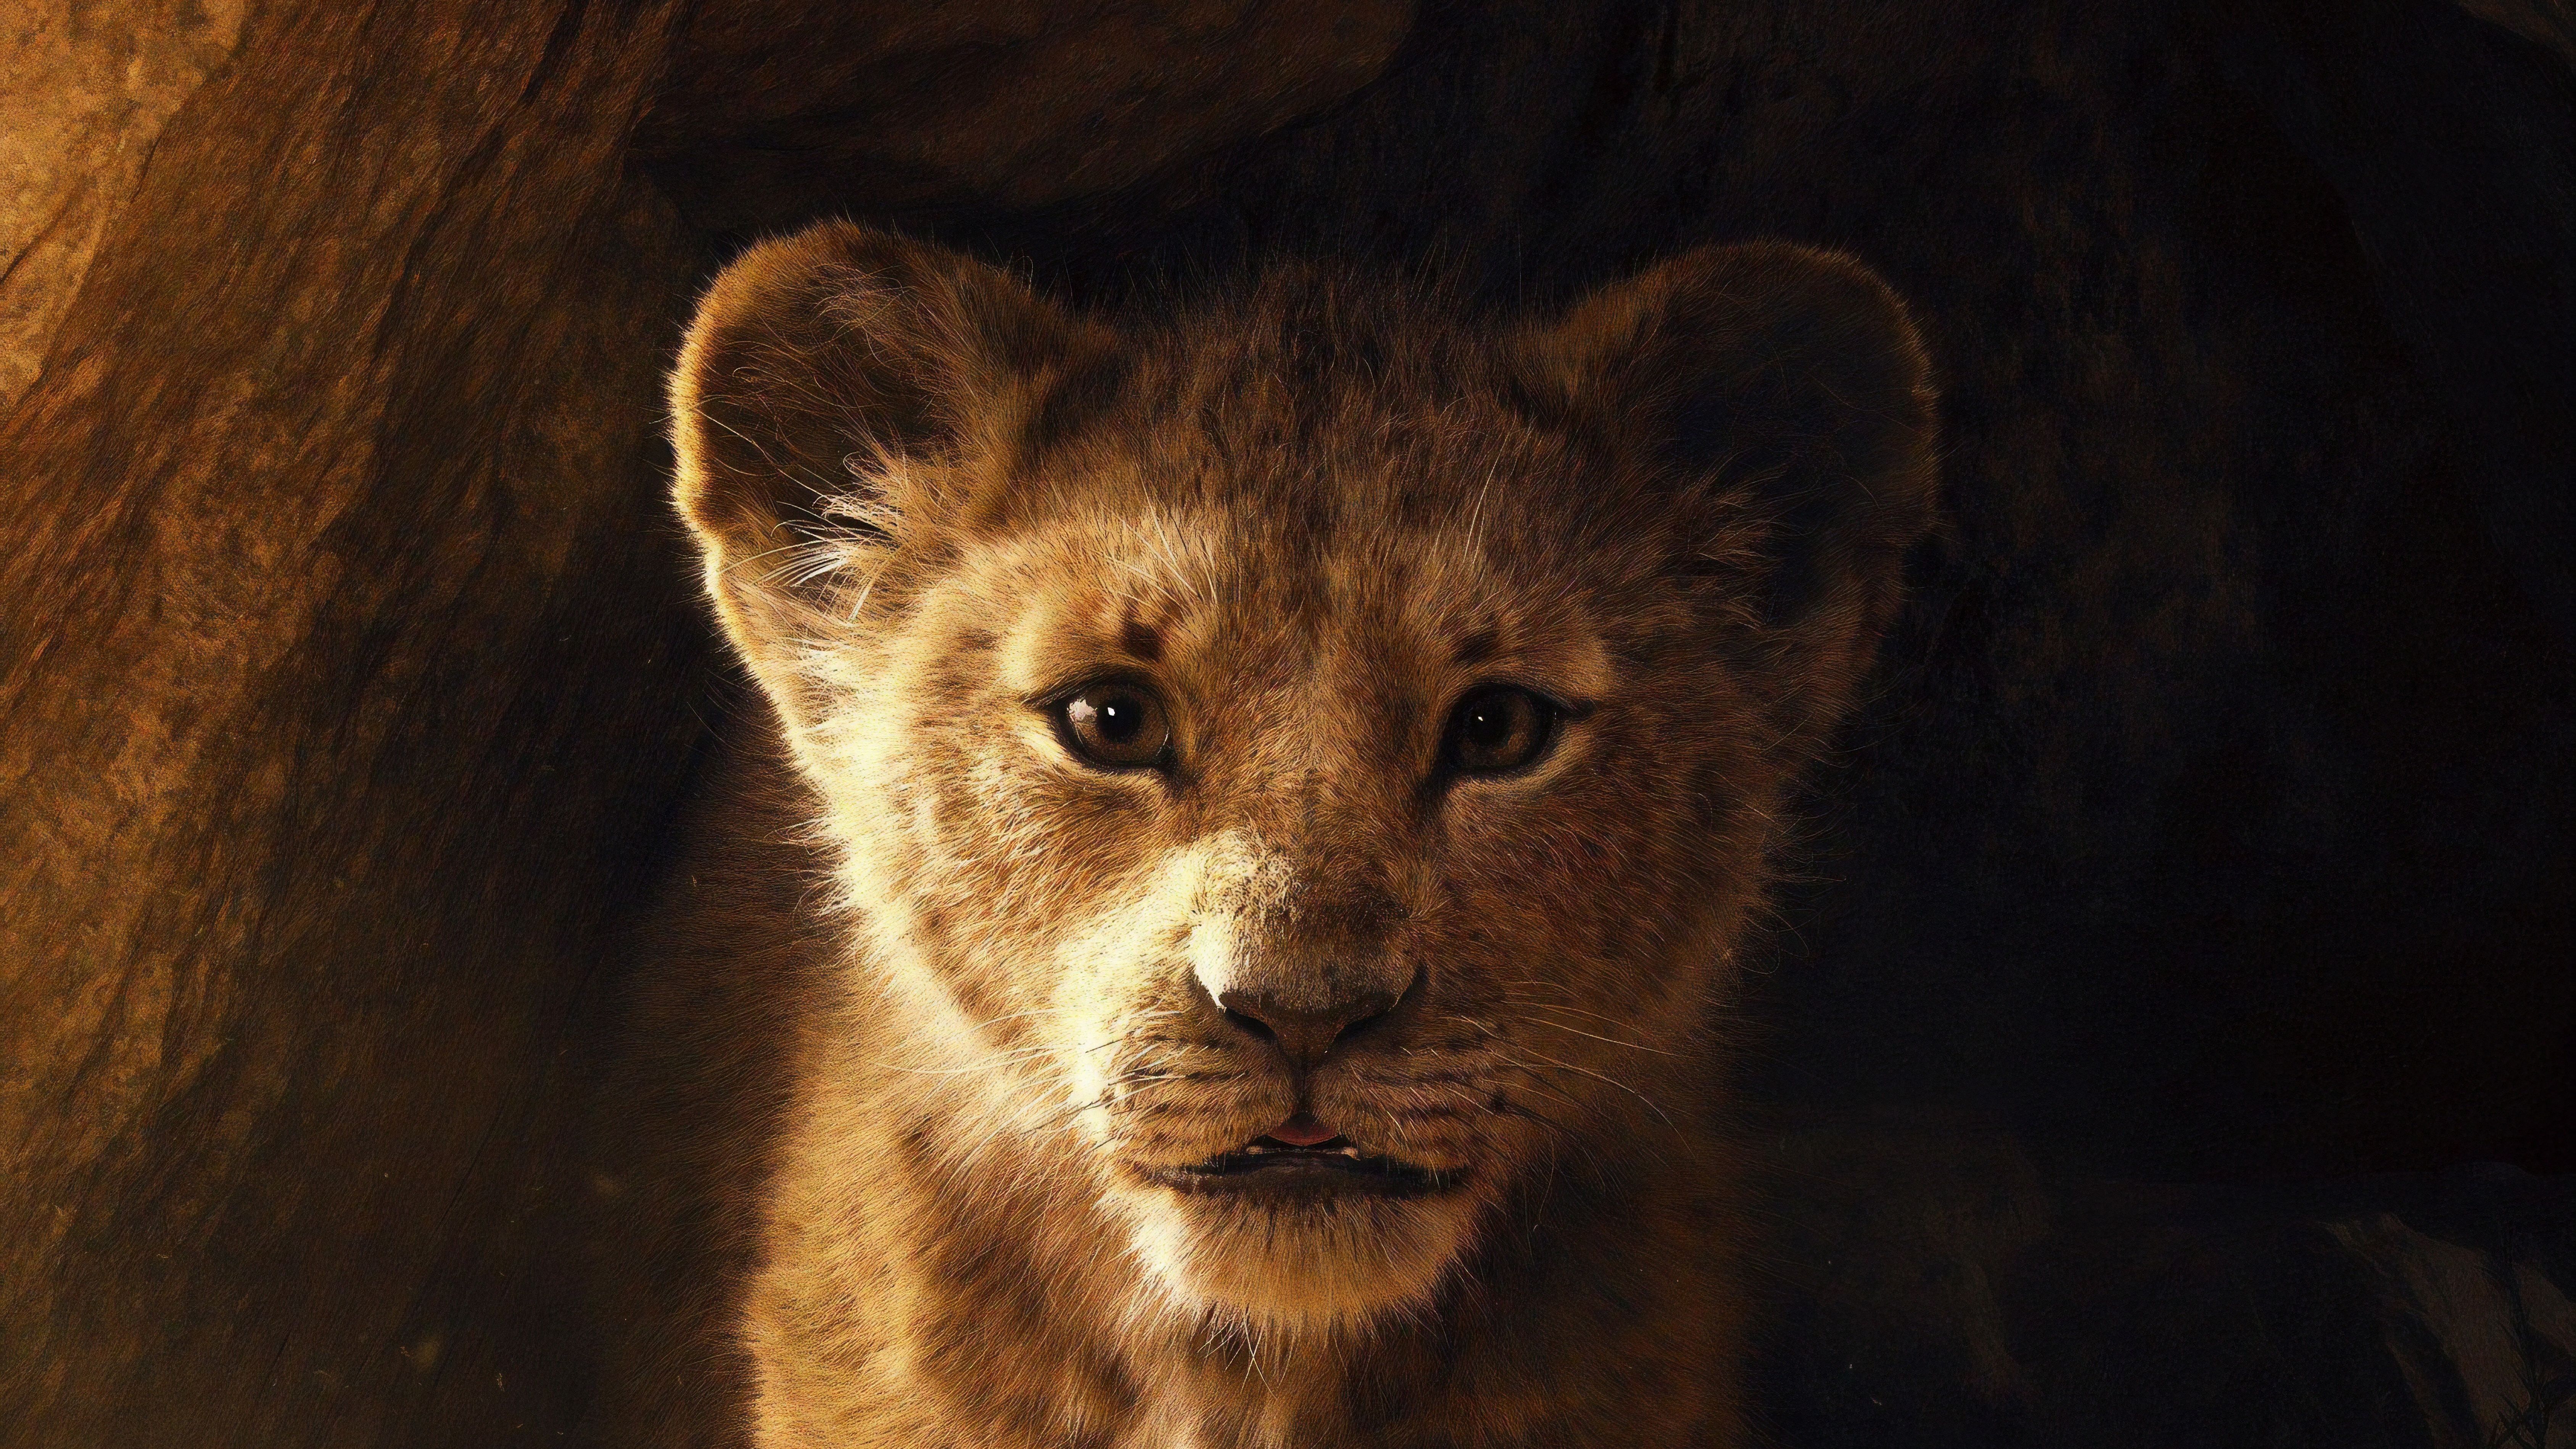 The Lion King HD Movies, 4k Wallpaper, Image, Background